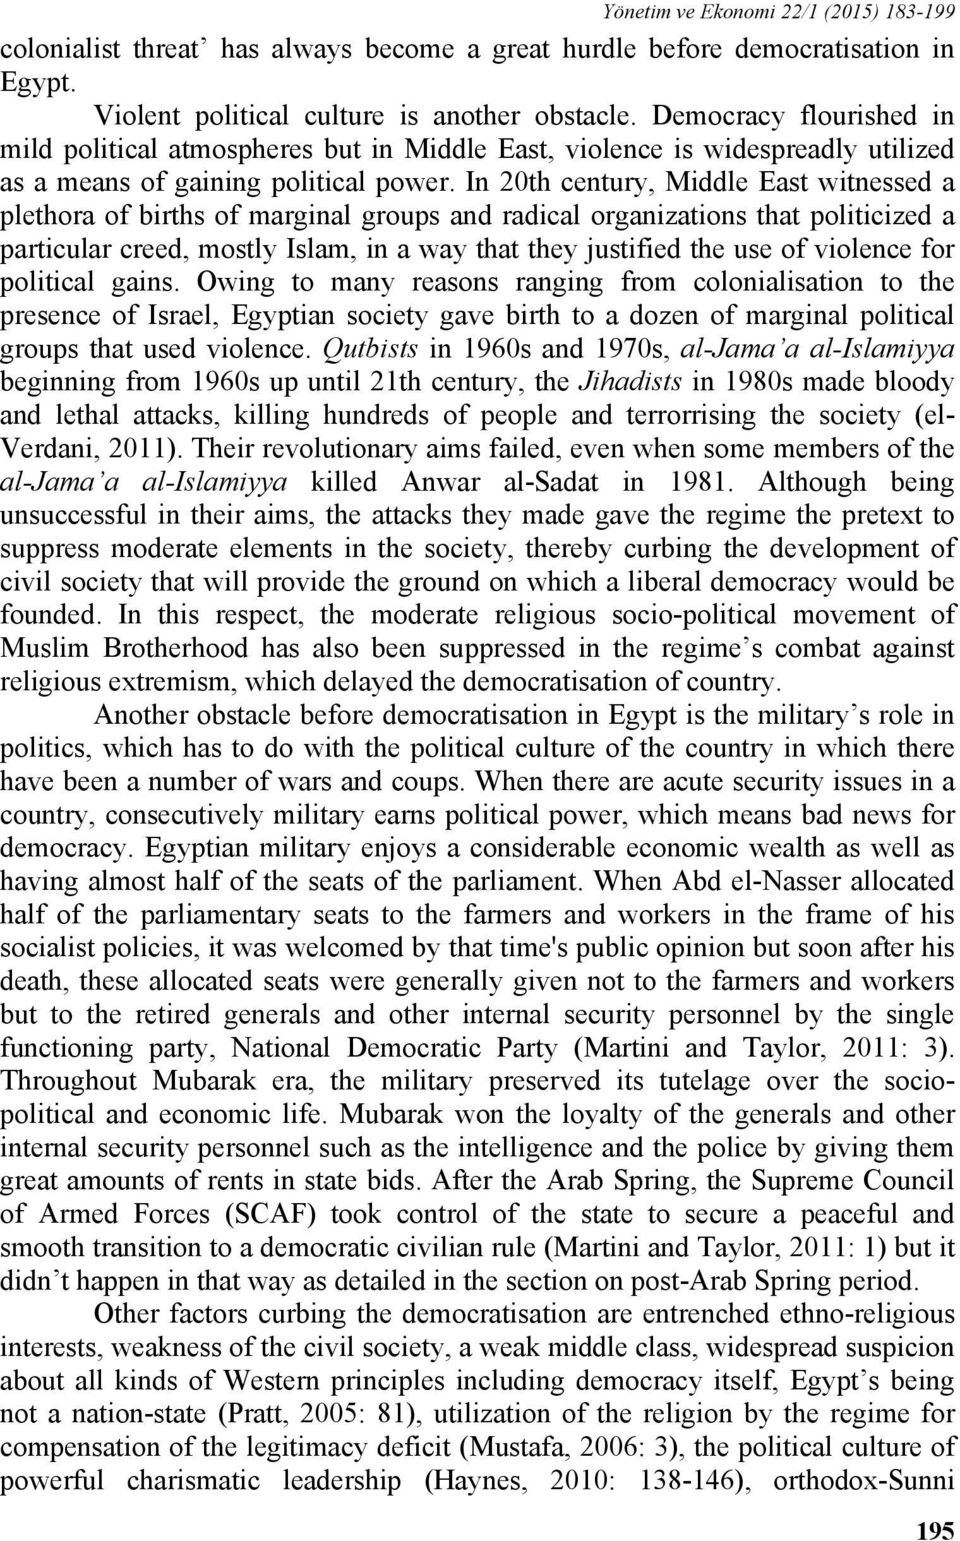 In 20th century, Middle East witnessed a plethora of births of marginal groups and radical organizations that politicized a particular creed, mostly Islam, in a way that they justified the use of